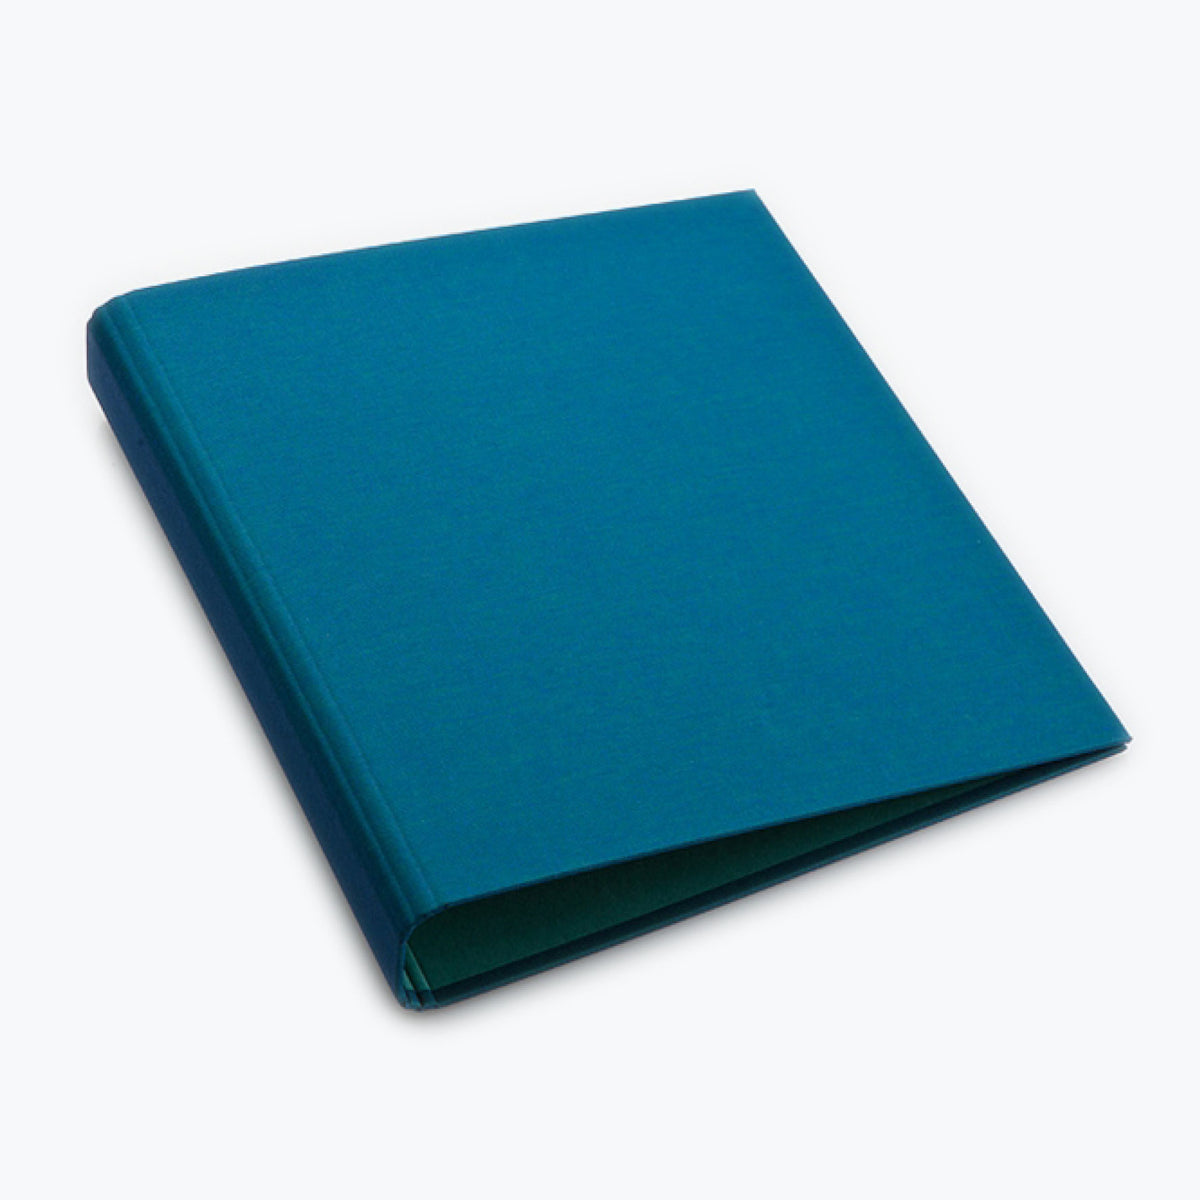 Bookbinders Design - Cloth Ringbinder - A3 - Emerald <Outgoing>